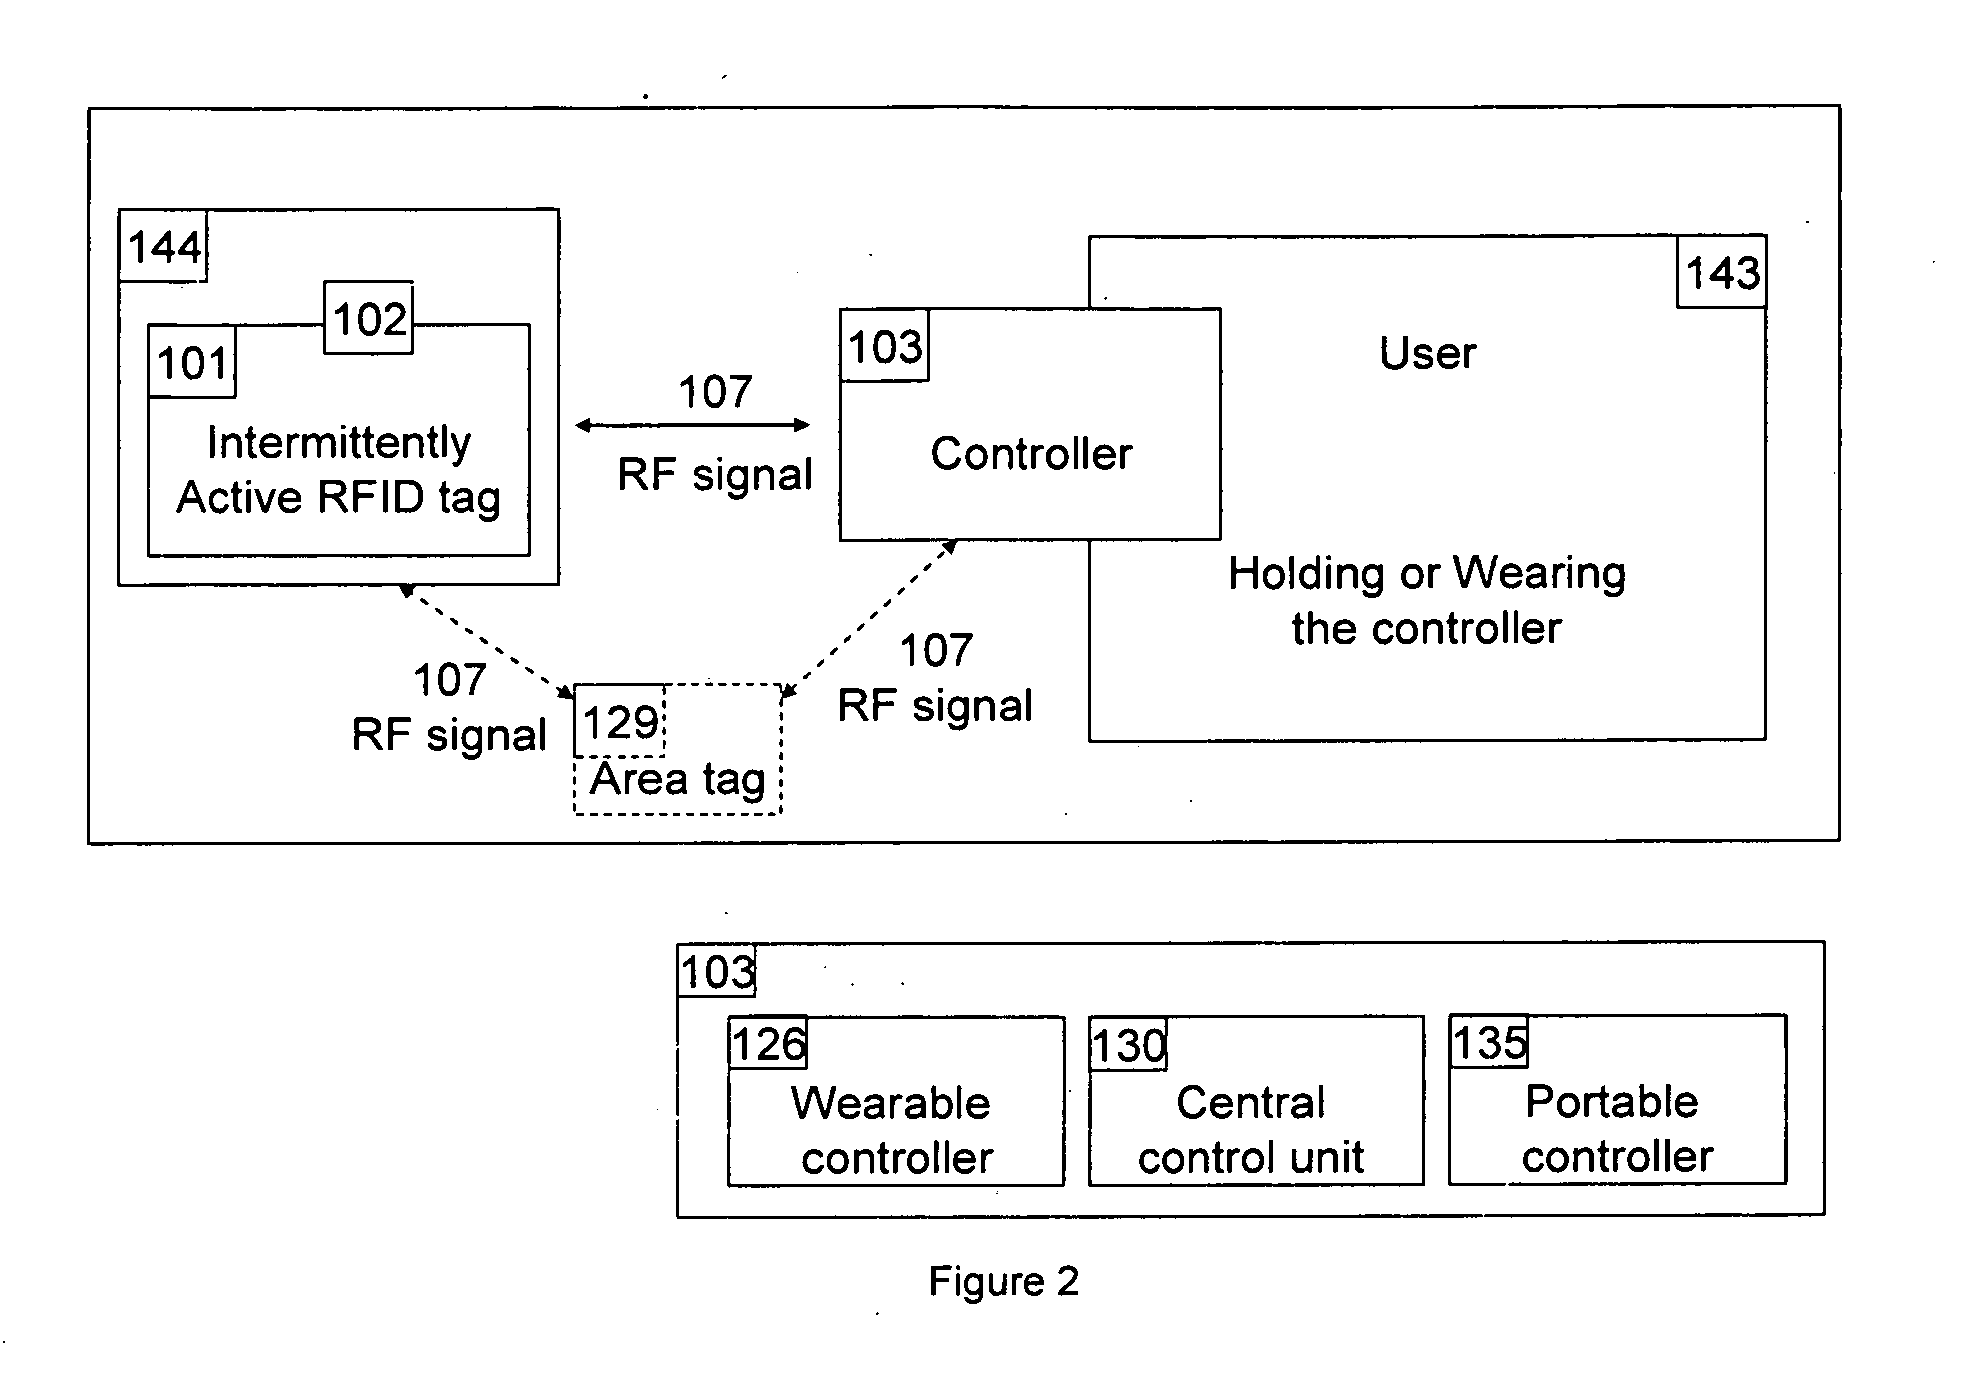 Apparatus and method for locating, tracking, controlling and recognizing tagged objects using active RFID technology.